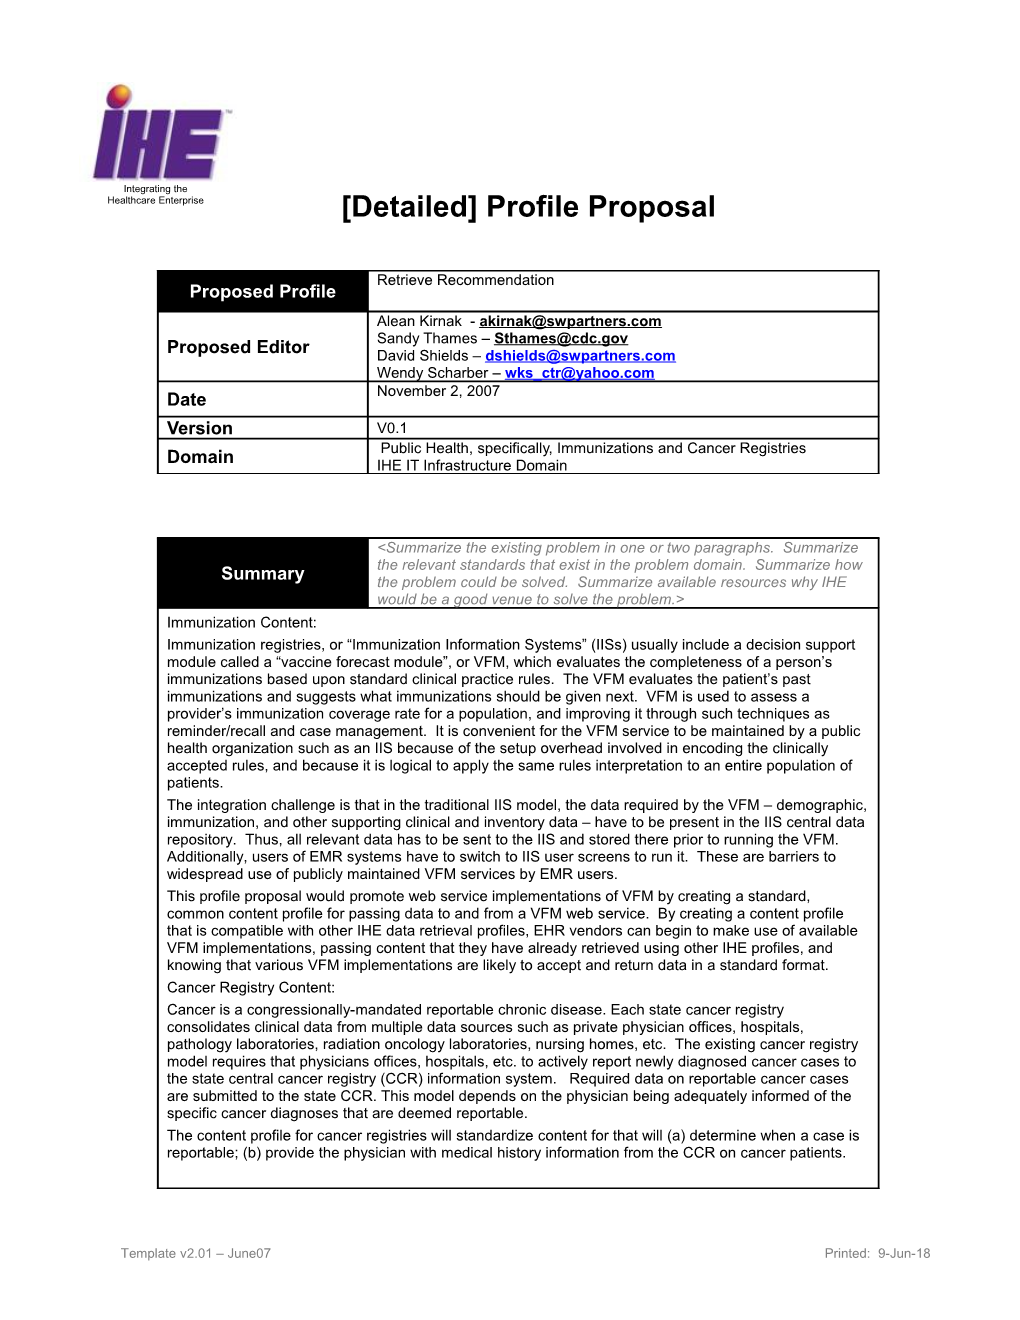 Detailed Profile Proposal Page 2